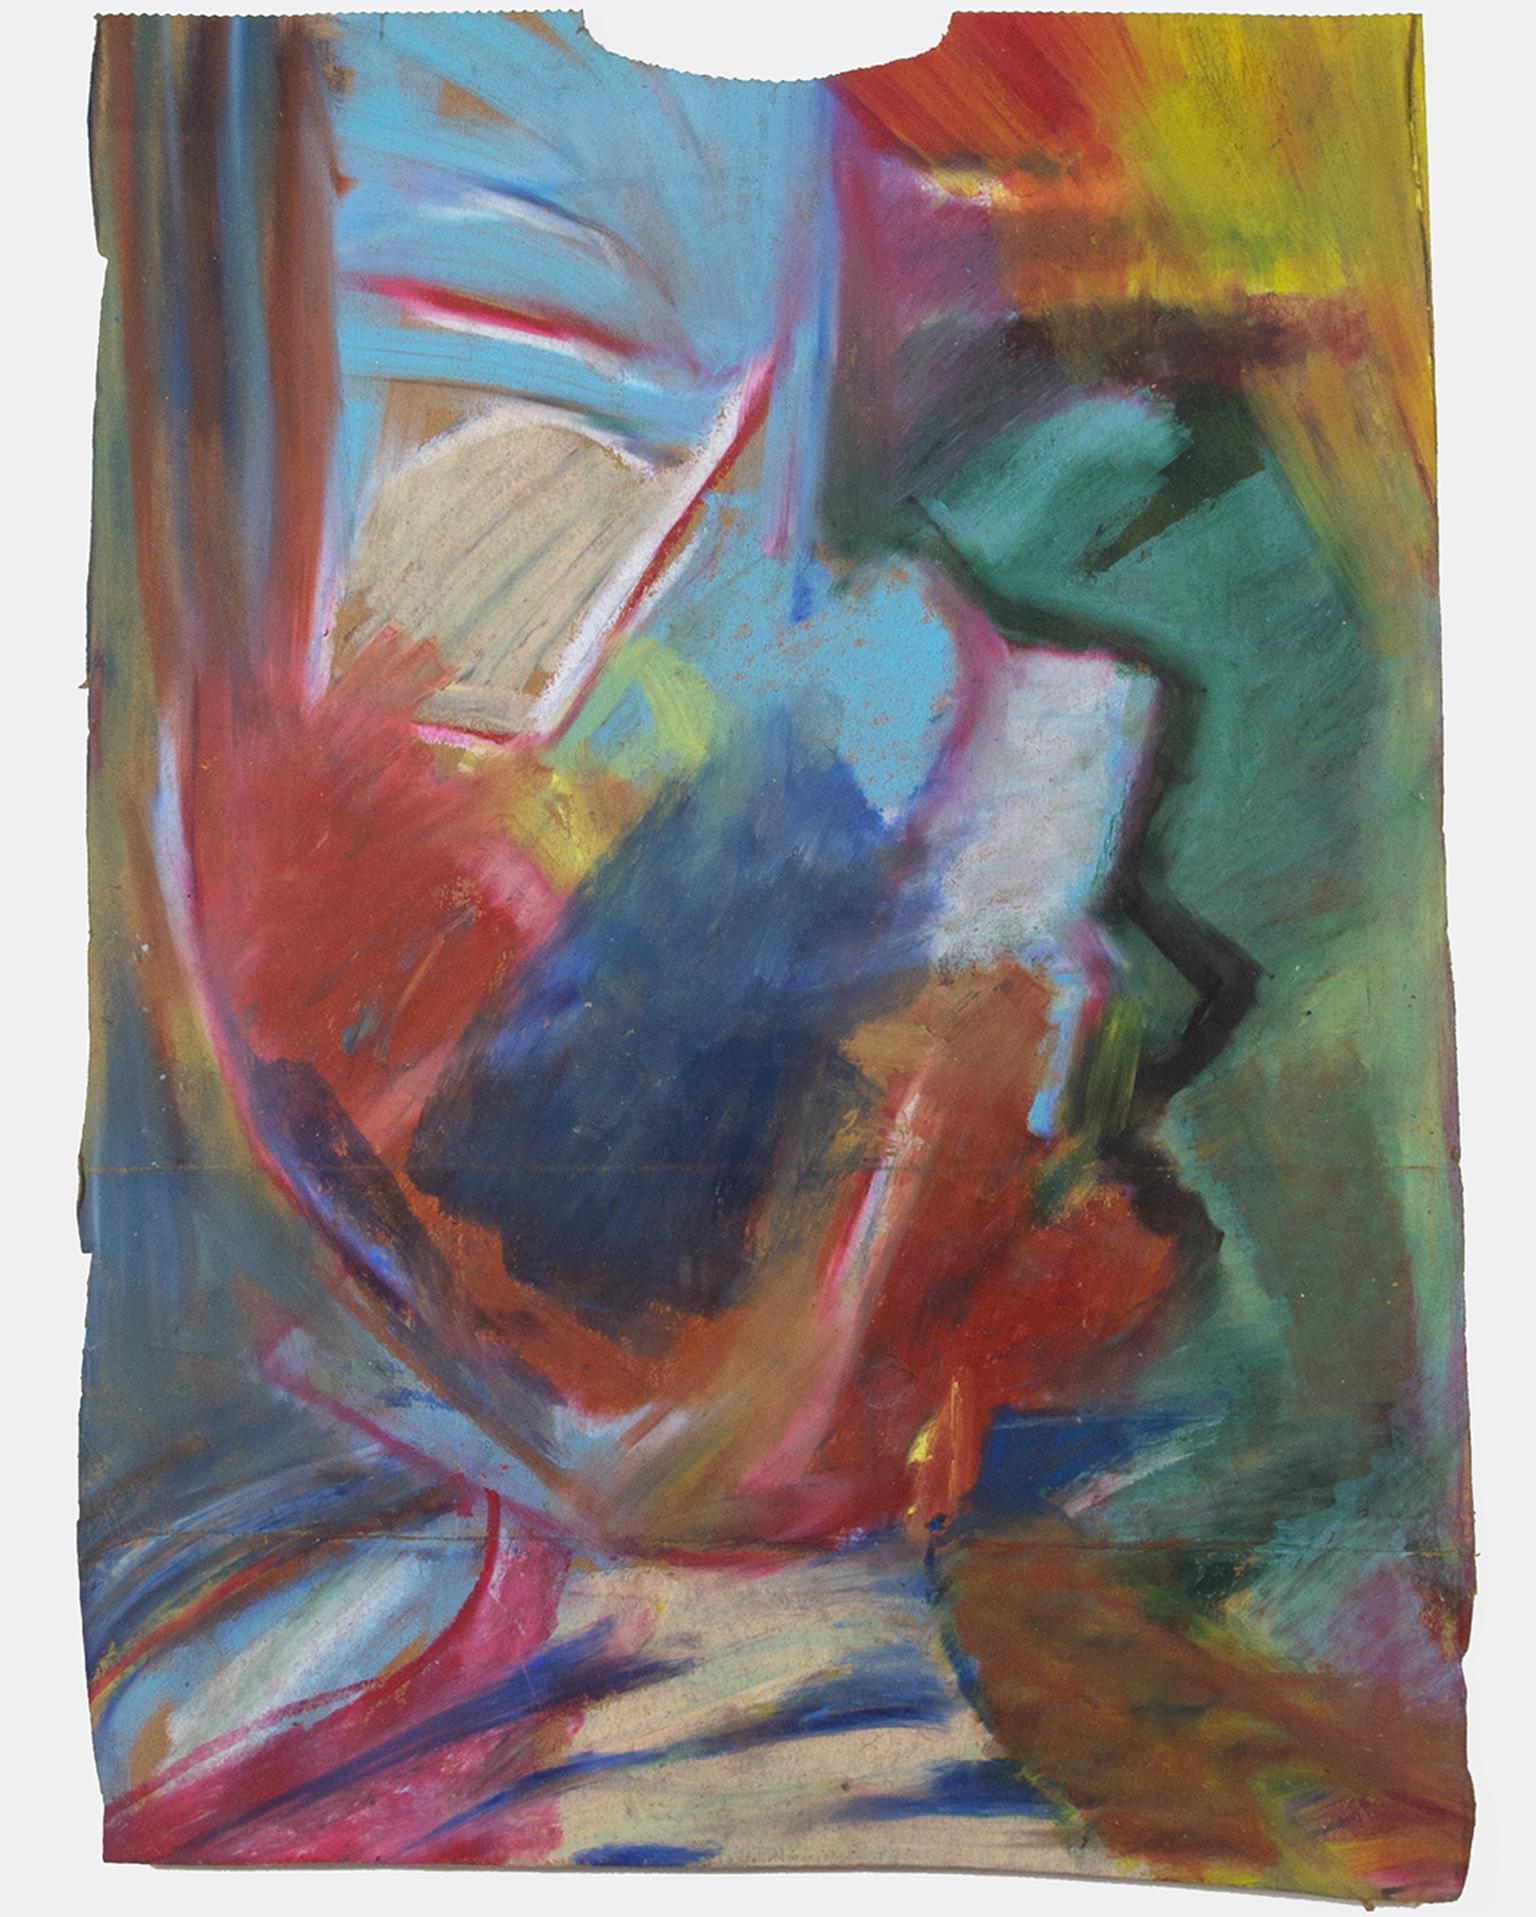 "Jittip" is an original oil pastel drawing on a grocery bag by Reginald K. Gee. The artist signed the piece on the back. It features abstract, expressionist marks in blue, red, orange, green, yellow, and white. 

16 1/4" x 11 3/4" art
20 1/2" x 19"